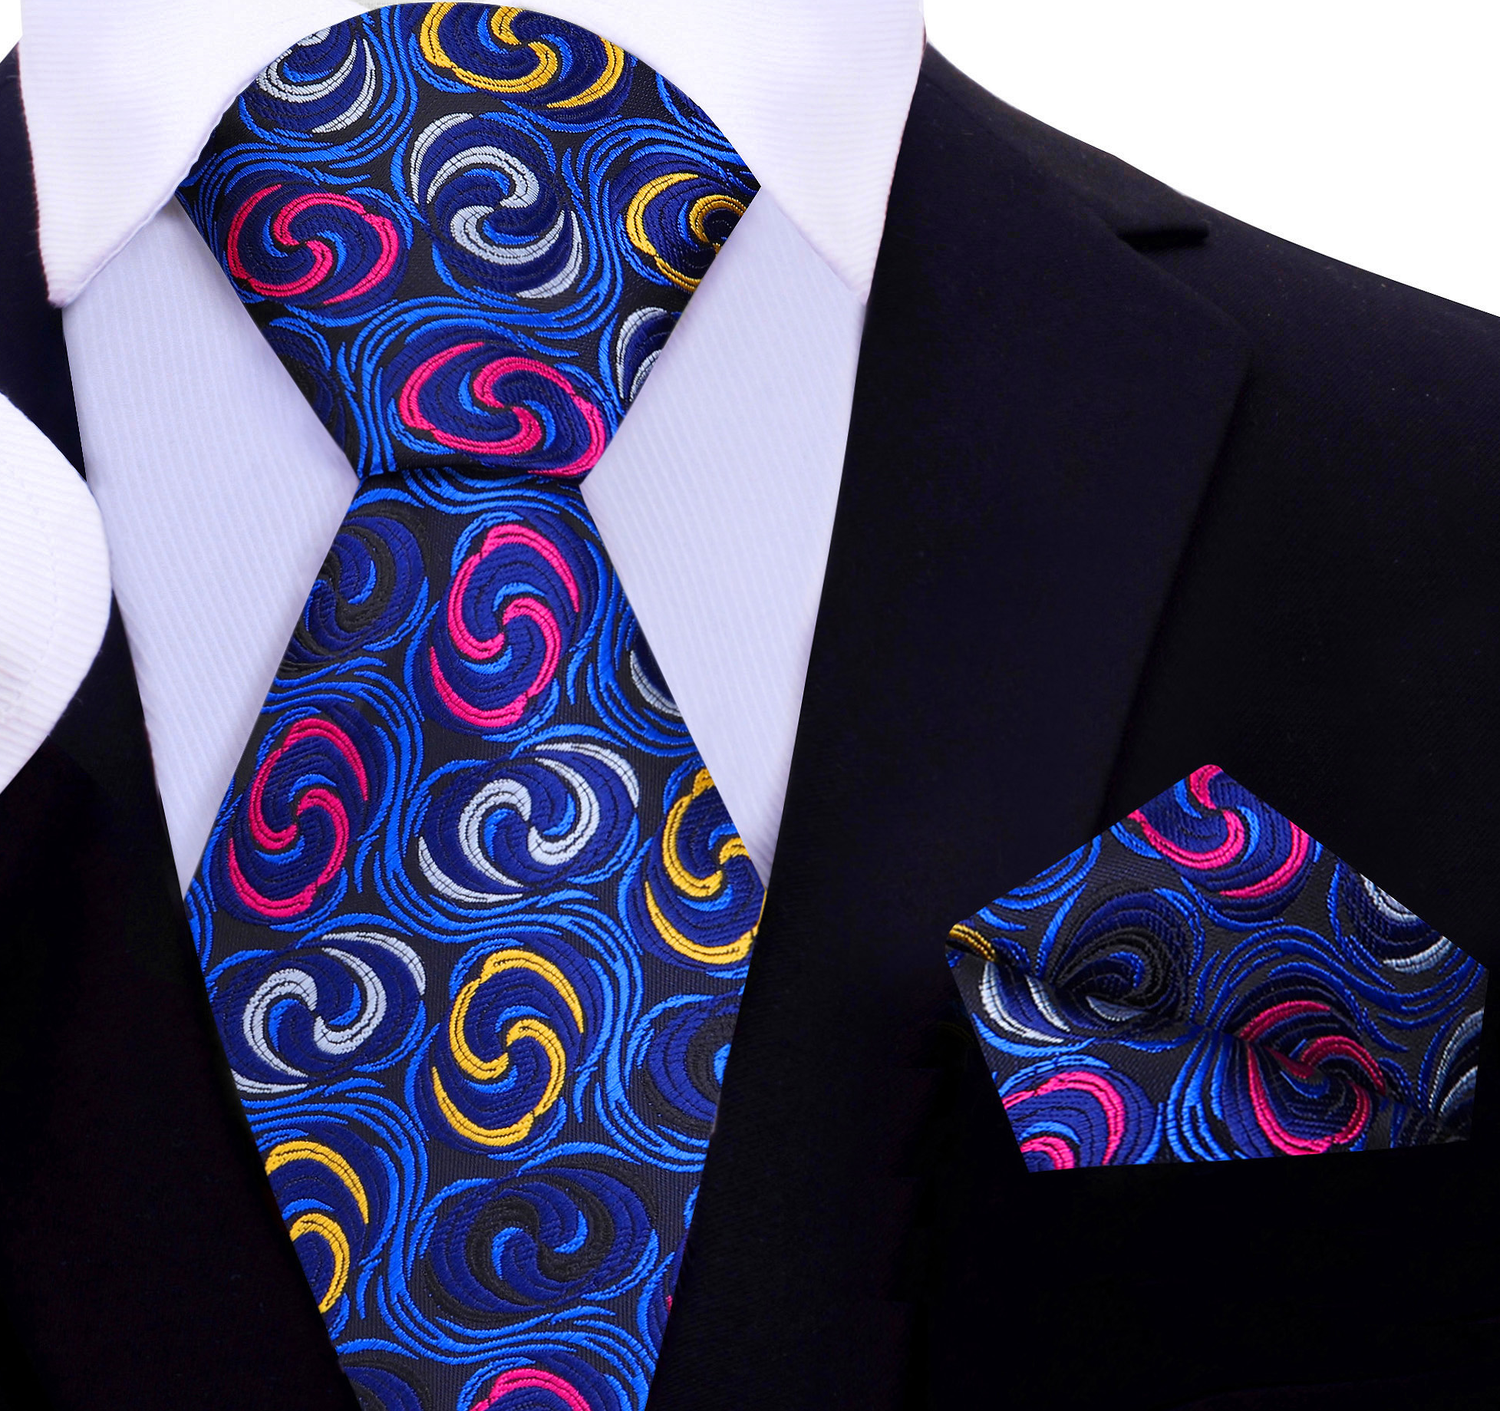 Blue, Yellow, Pink Abstract Swirls Tie and Square